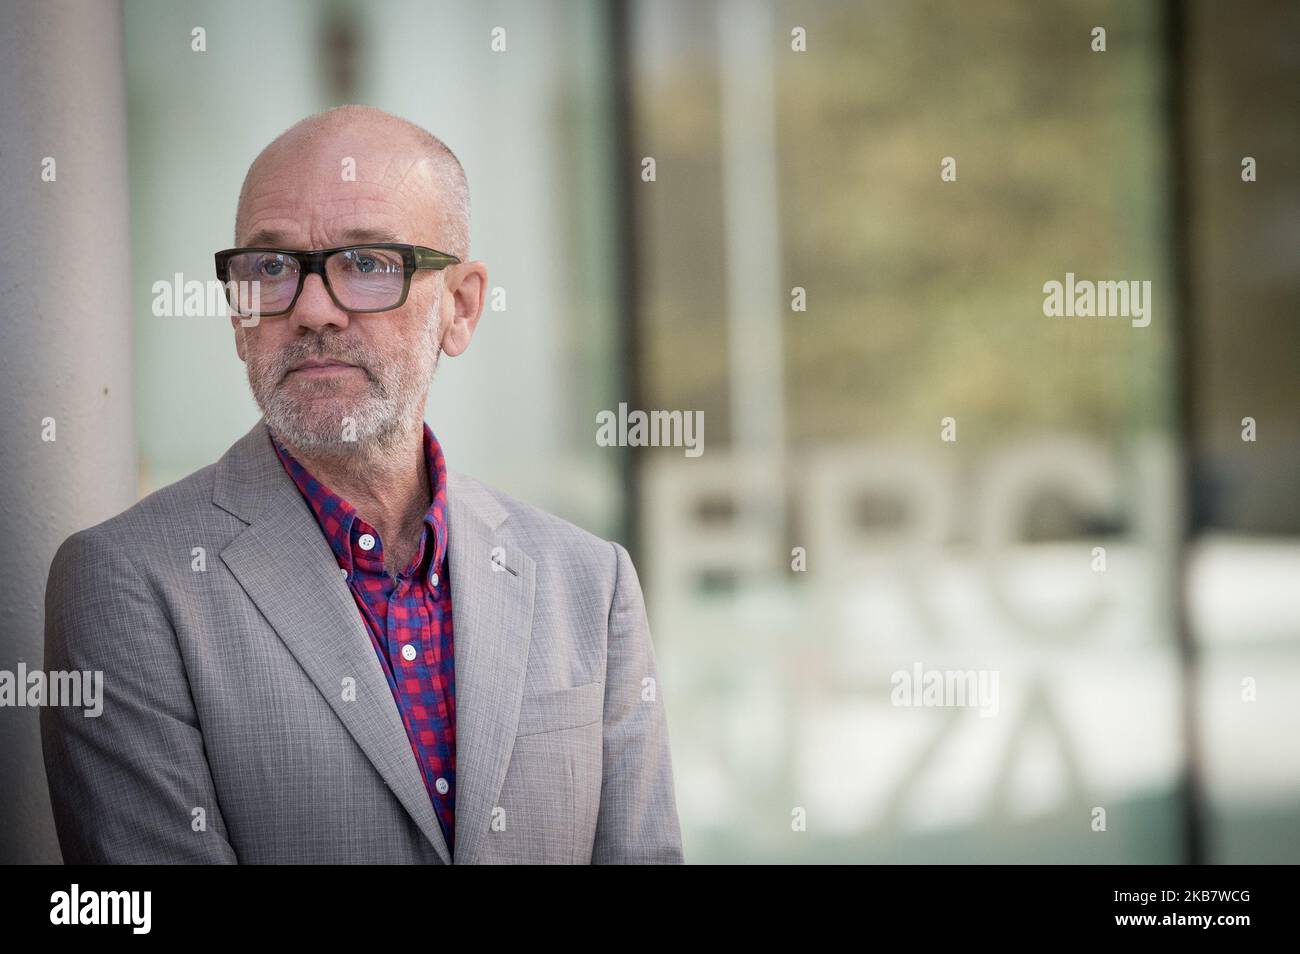 Michael Stipe attends the photocall for the presentation of his second book ‘Our Interference Times: a visual record’ at MAXXI Museum in Rome on October 08, 2019, in Rome Italy (Photo by Giuseppe Maffia/NurPhoto) Stock Photo